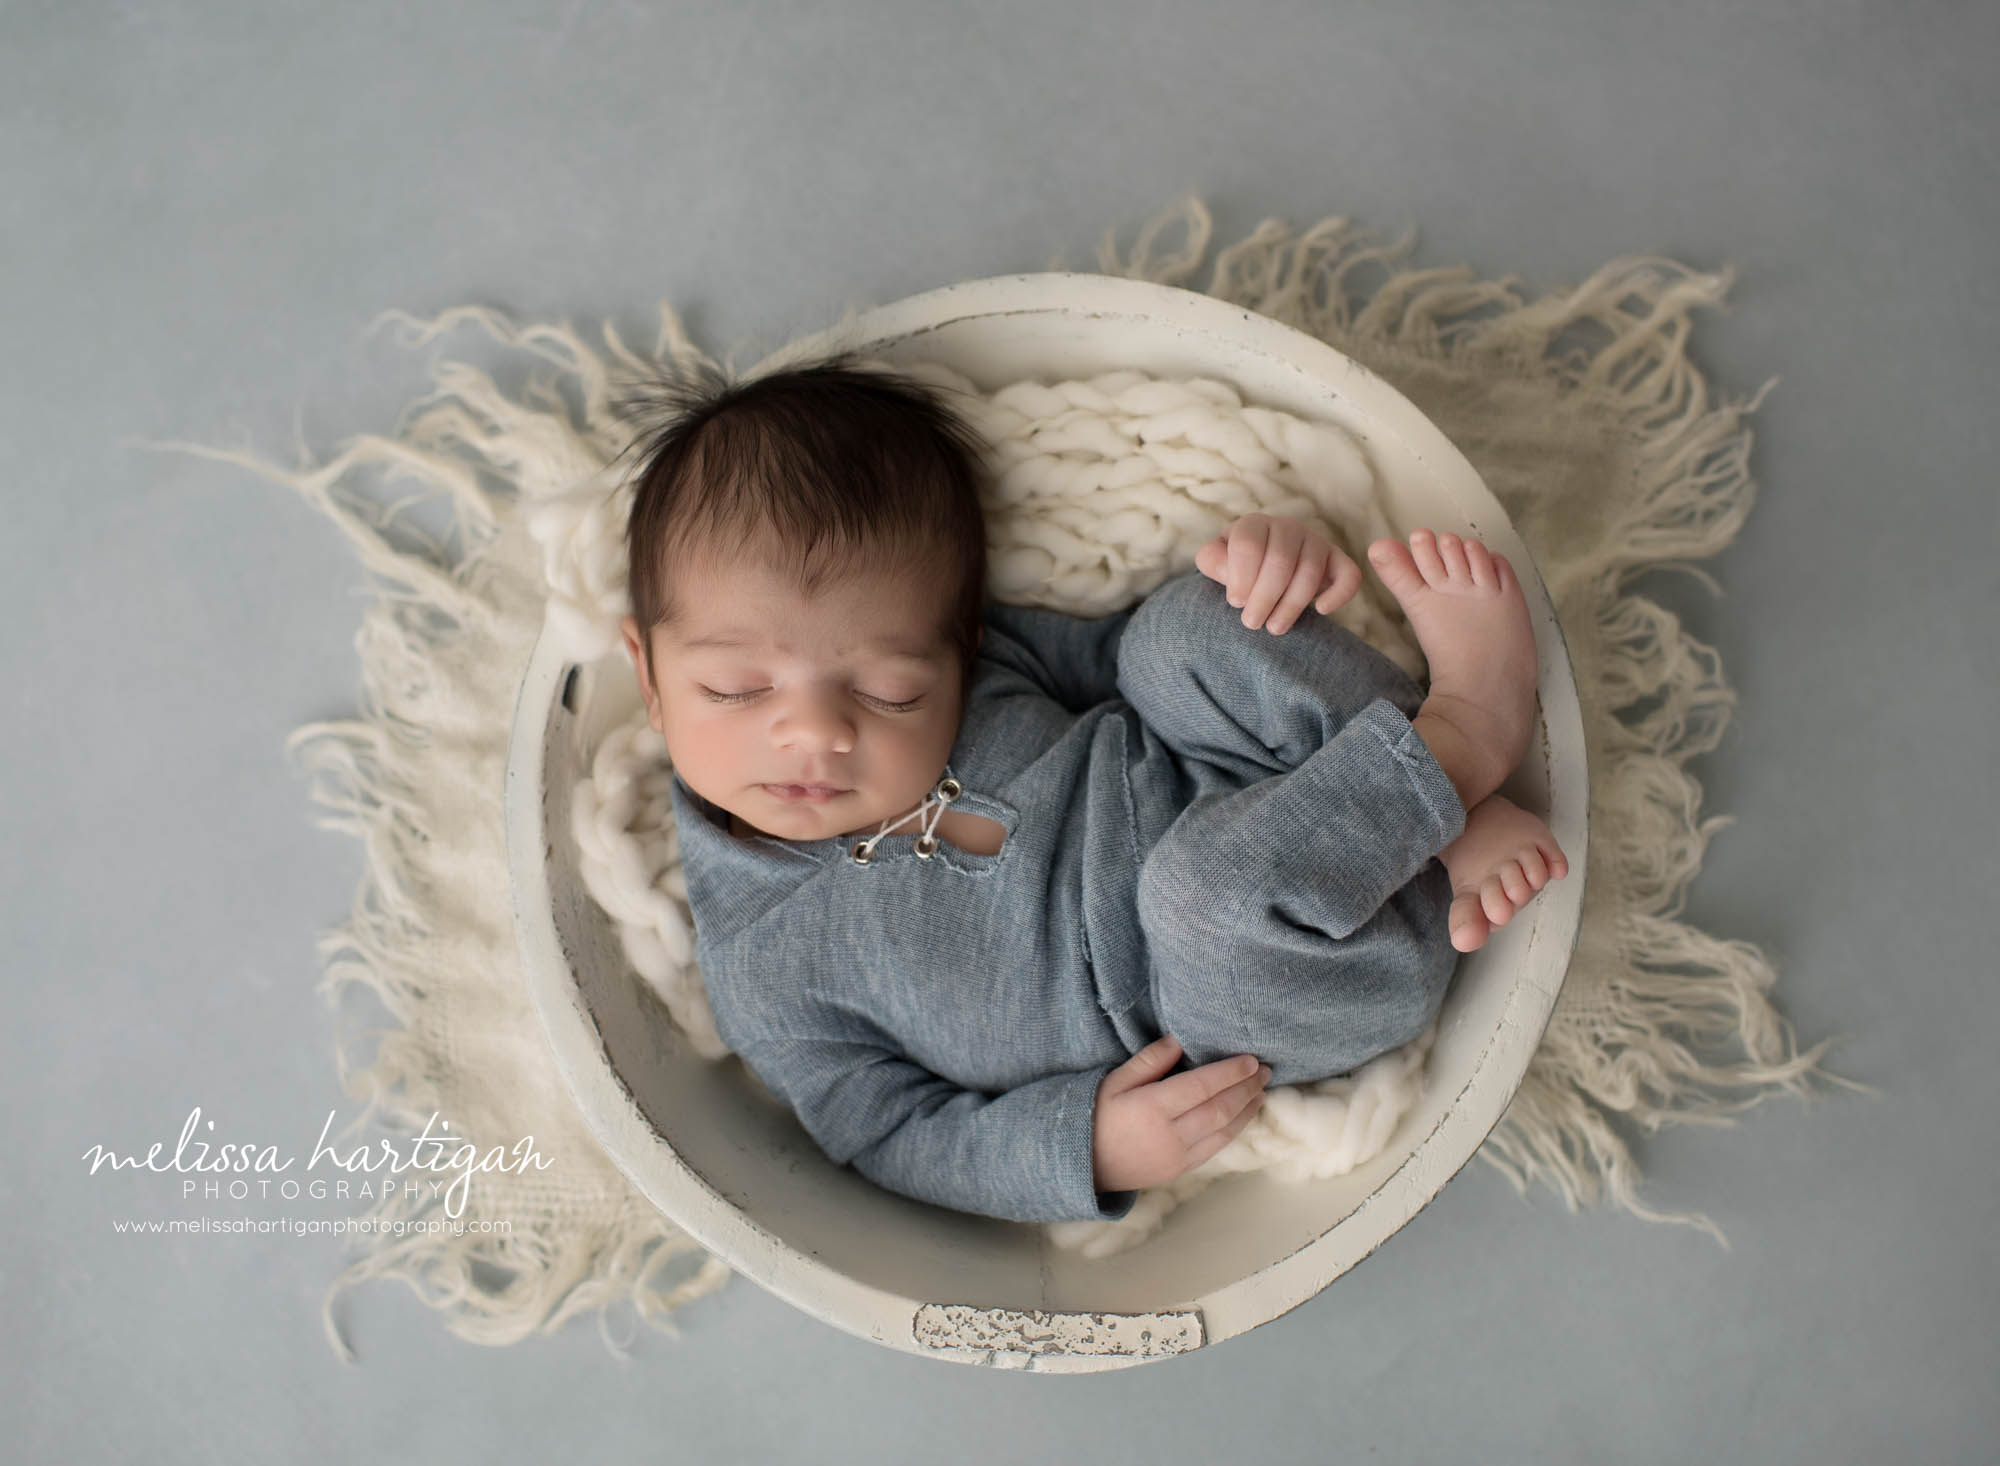 newborn baby boy wearing blue outfit posed in wooden cream bowl CT newborn Photography Manchester